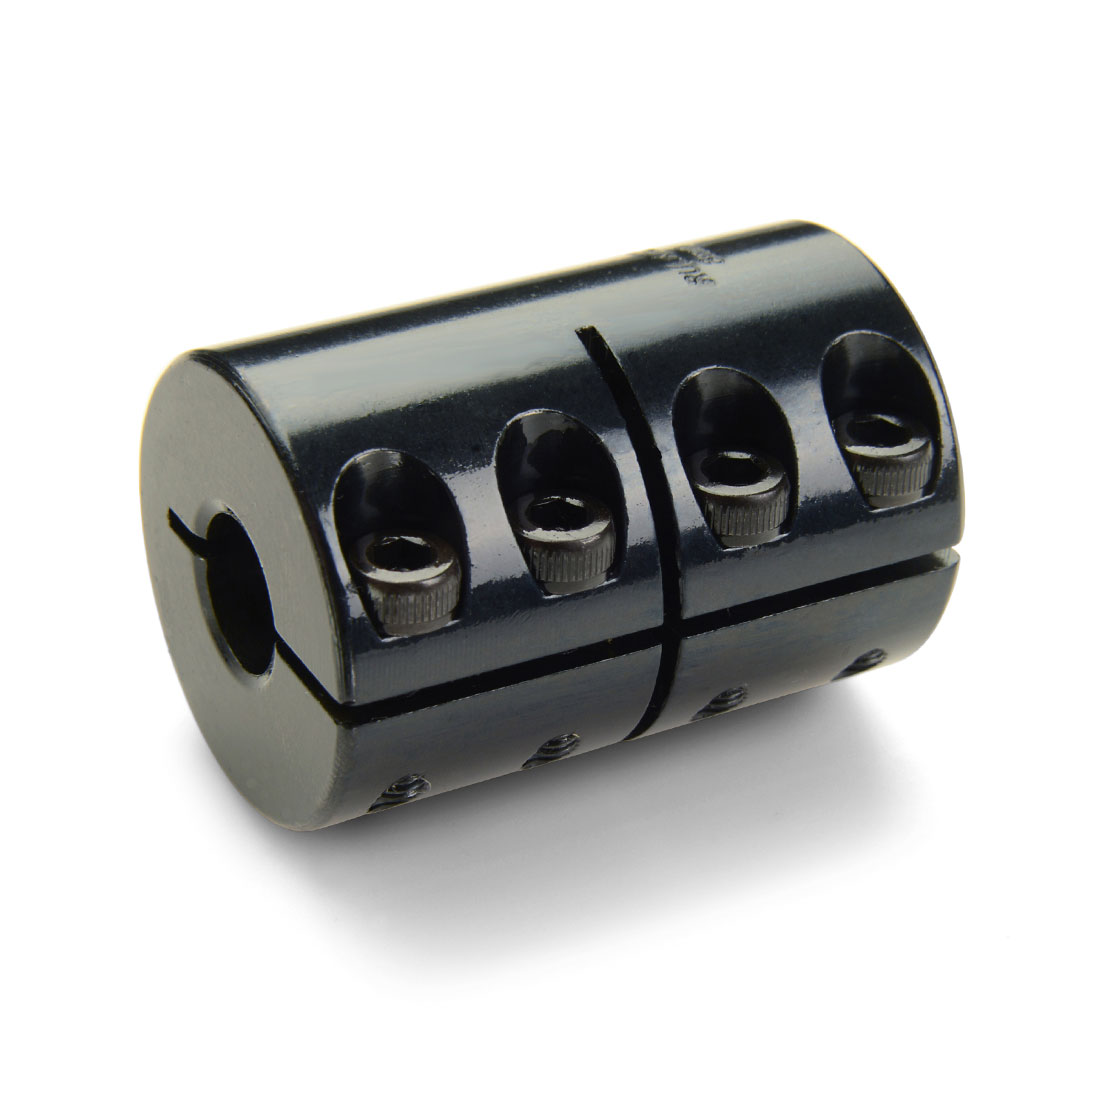 20mm Bore A Diameter 42mm OD 20mm Bore B Diameter Metric Ruland MSPX-20-20-F Two-Piece Clamping Rigid Coupling Black Oxide Steel 65mm Length Ruland Manufacturing 3312 